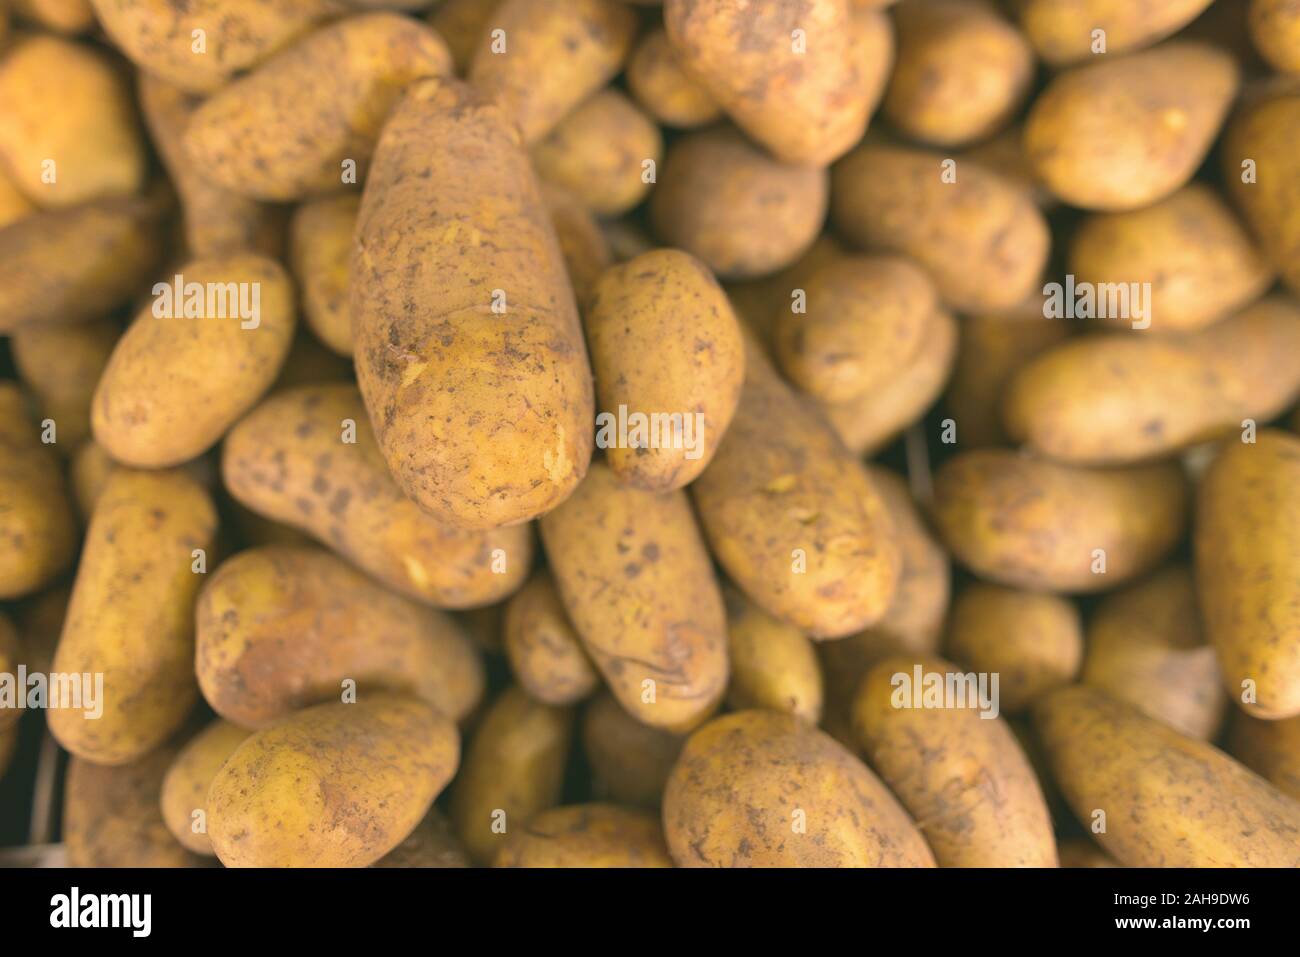 Full Frame Shot Of Raw Healthy Potatoes For Sale Stock Photo